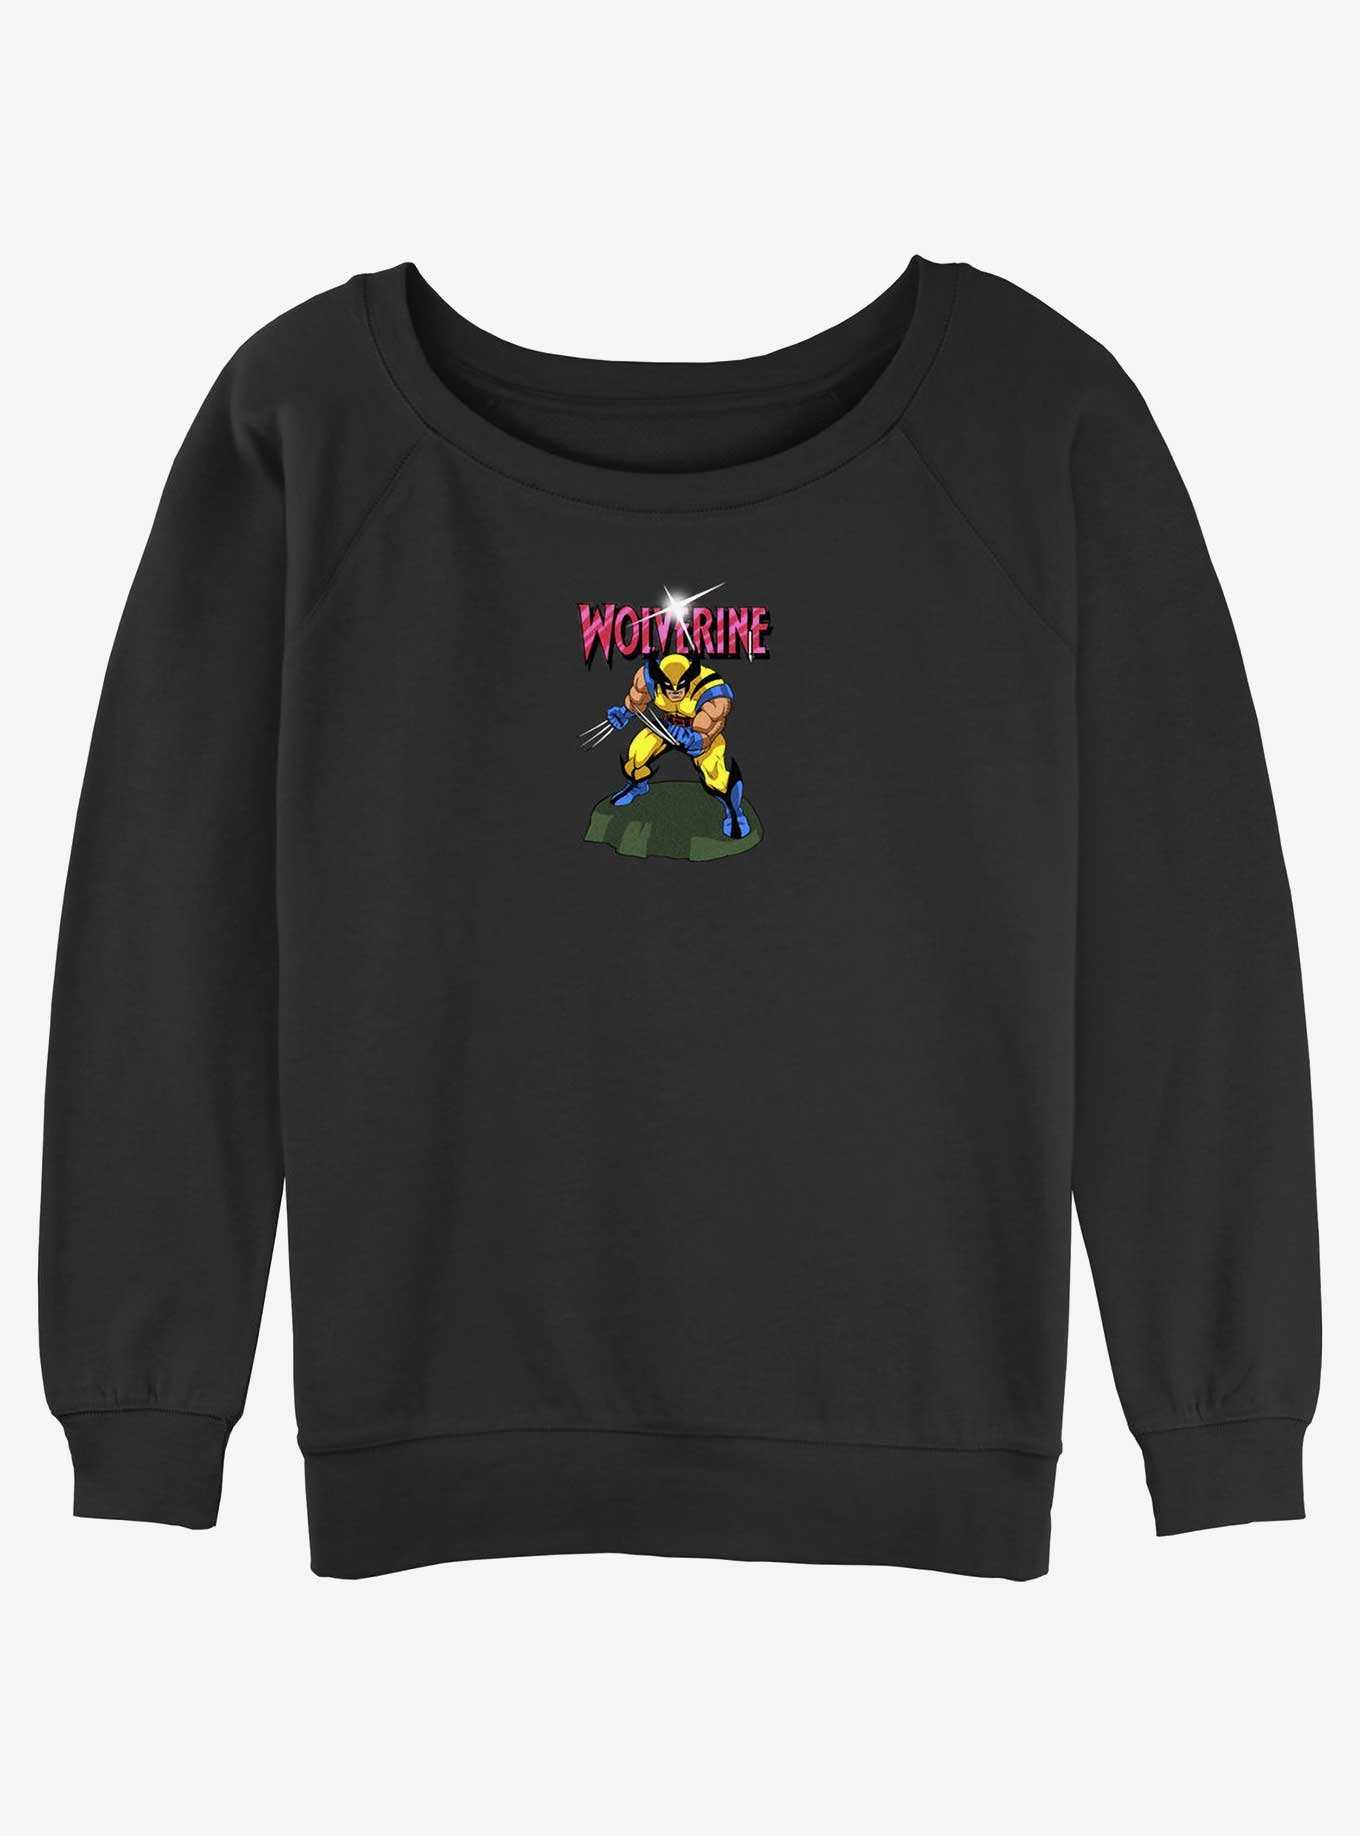 Wolverine Action Pose Womens Slouchy Sweatshirt, , hi-res